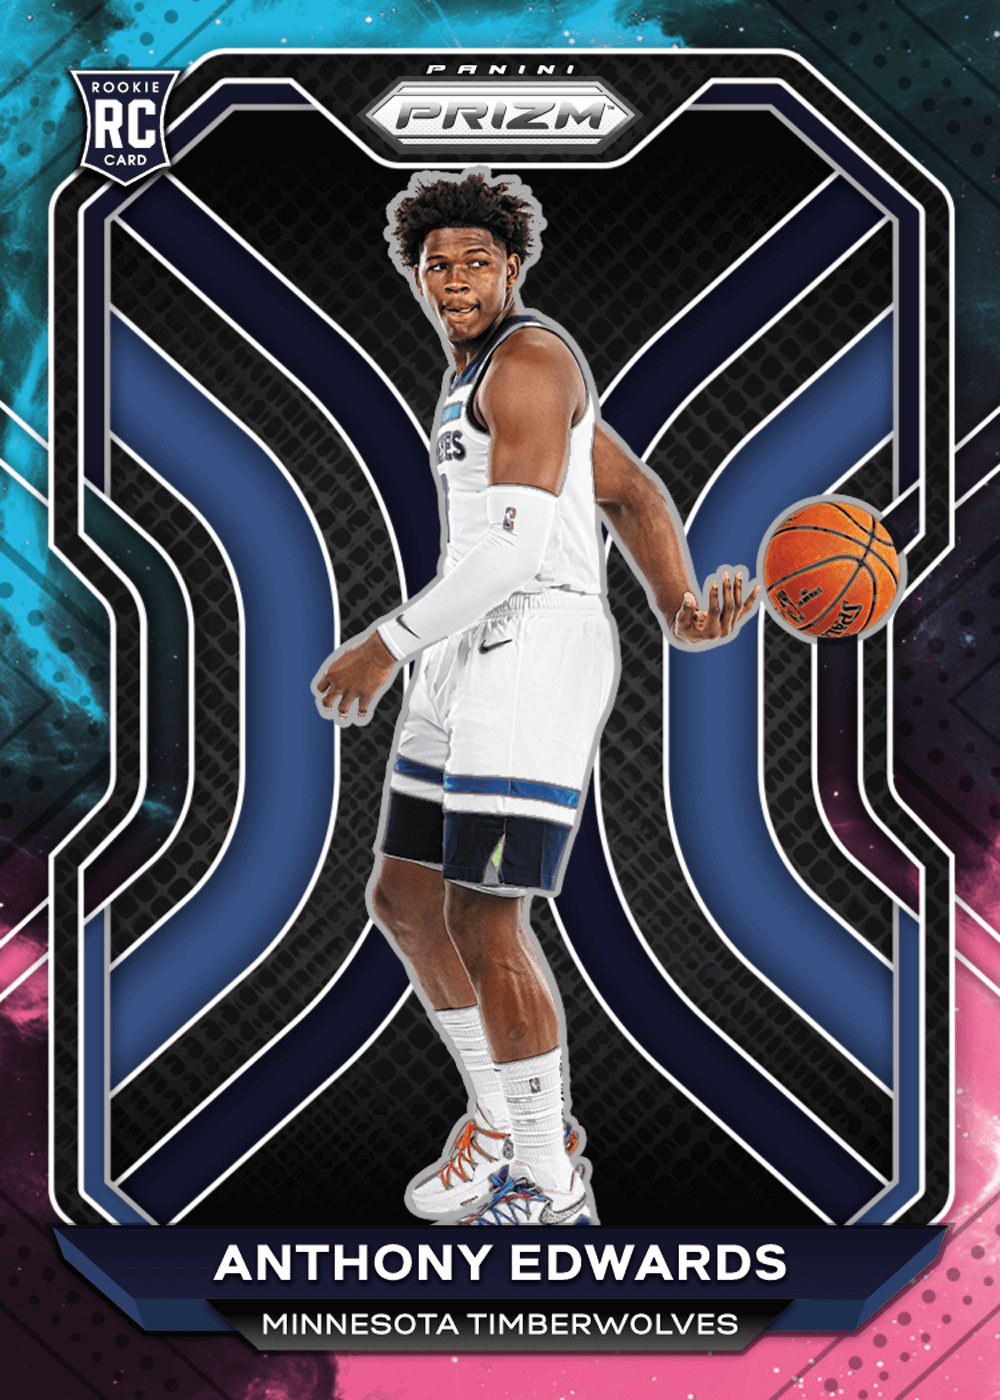 Prizm is back! Get an early look with First Off the Line! NBA Dunk